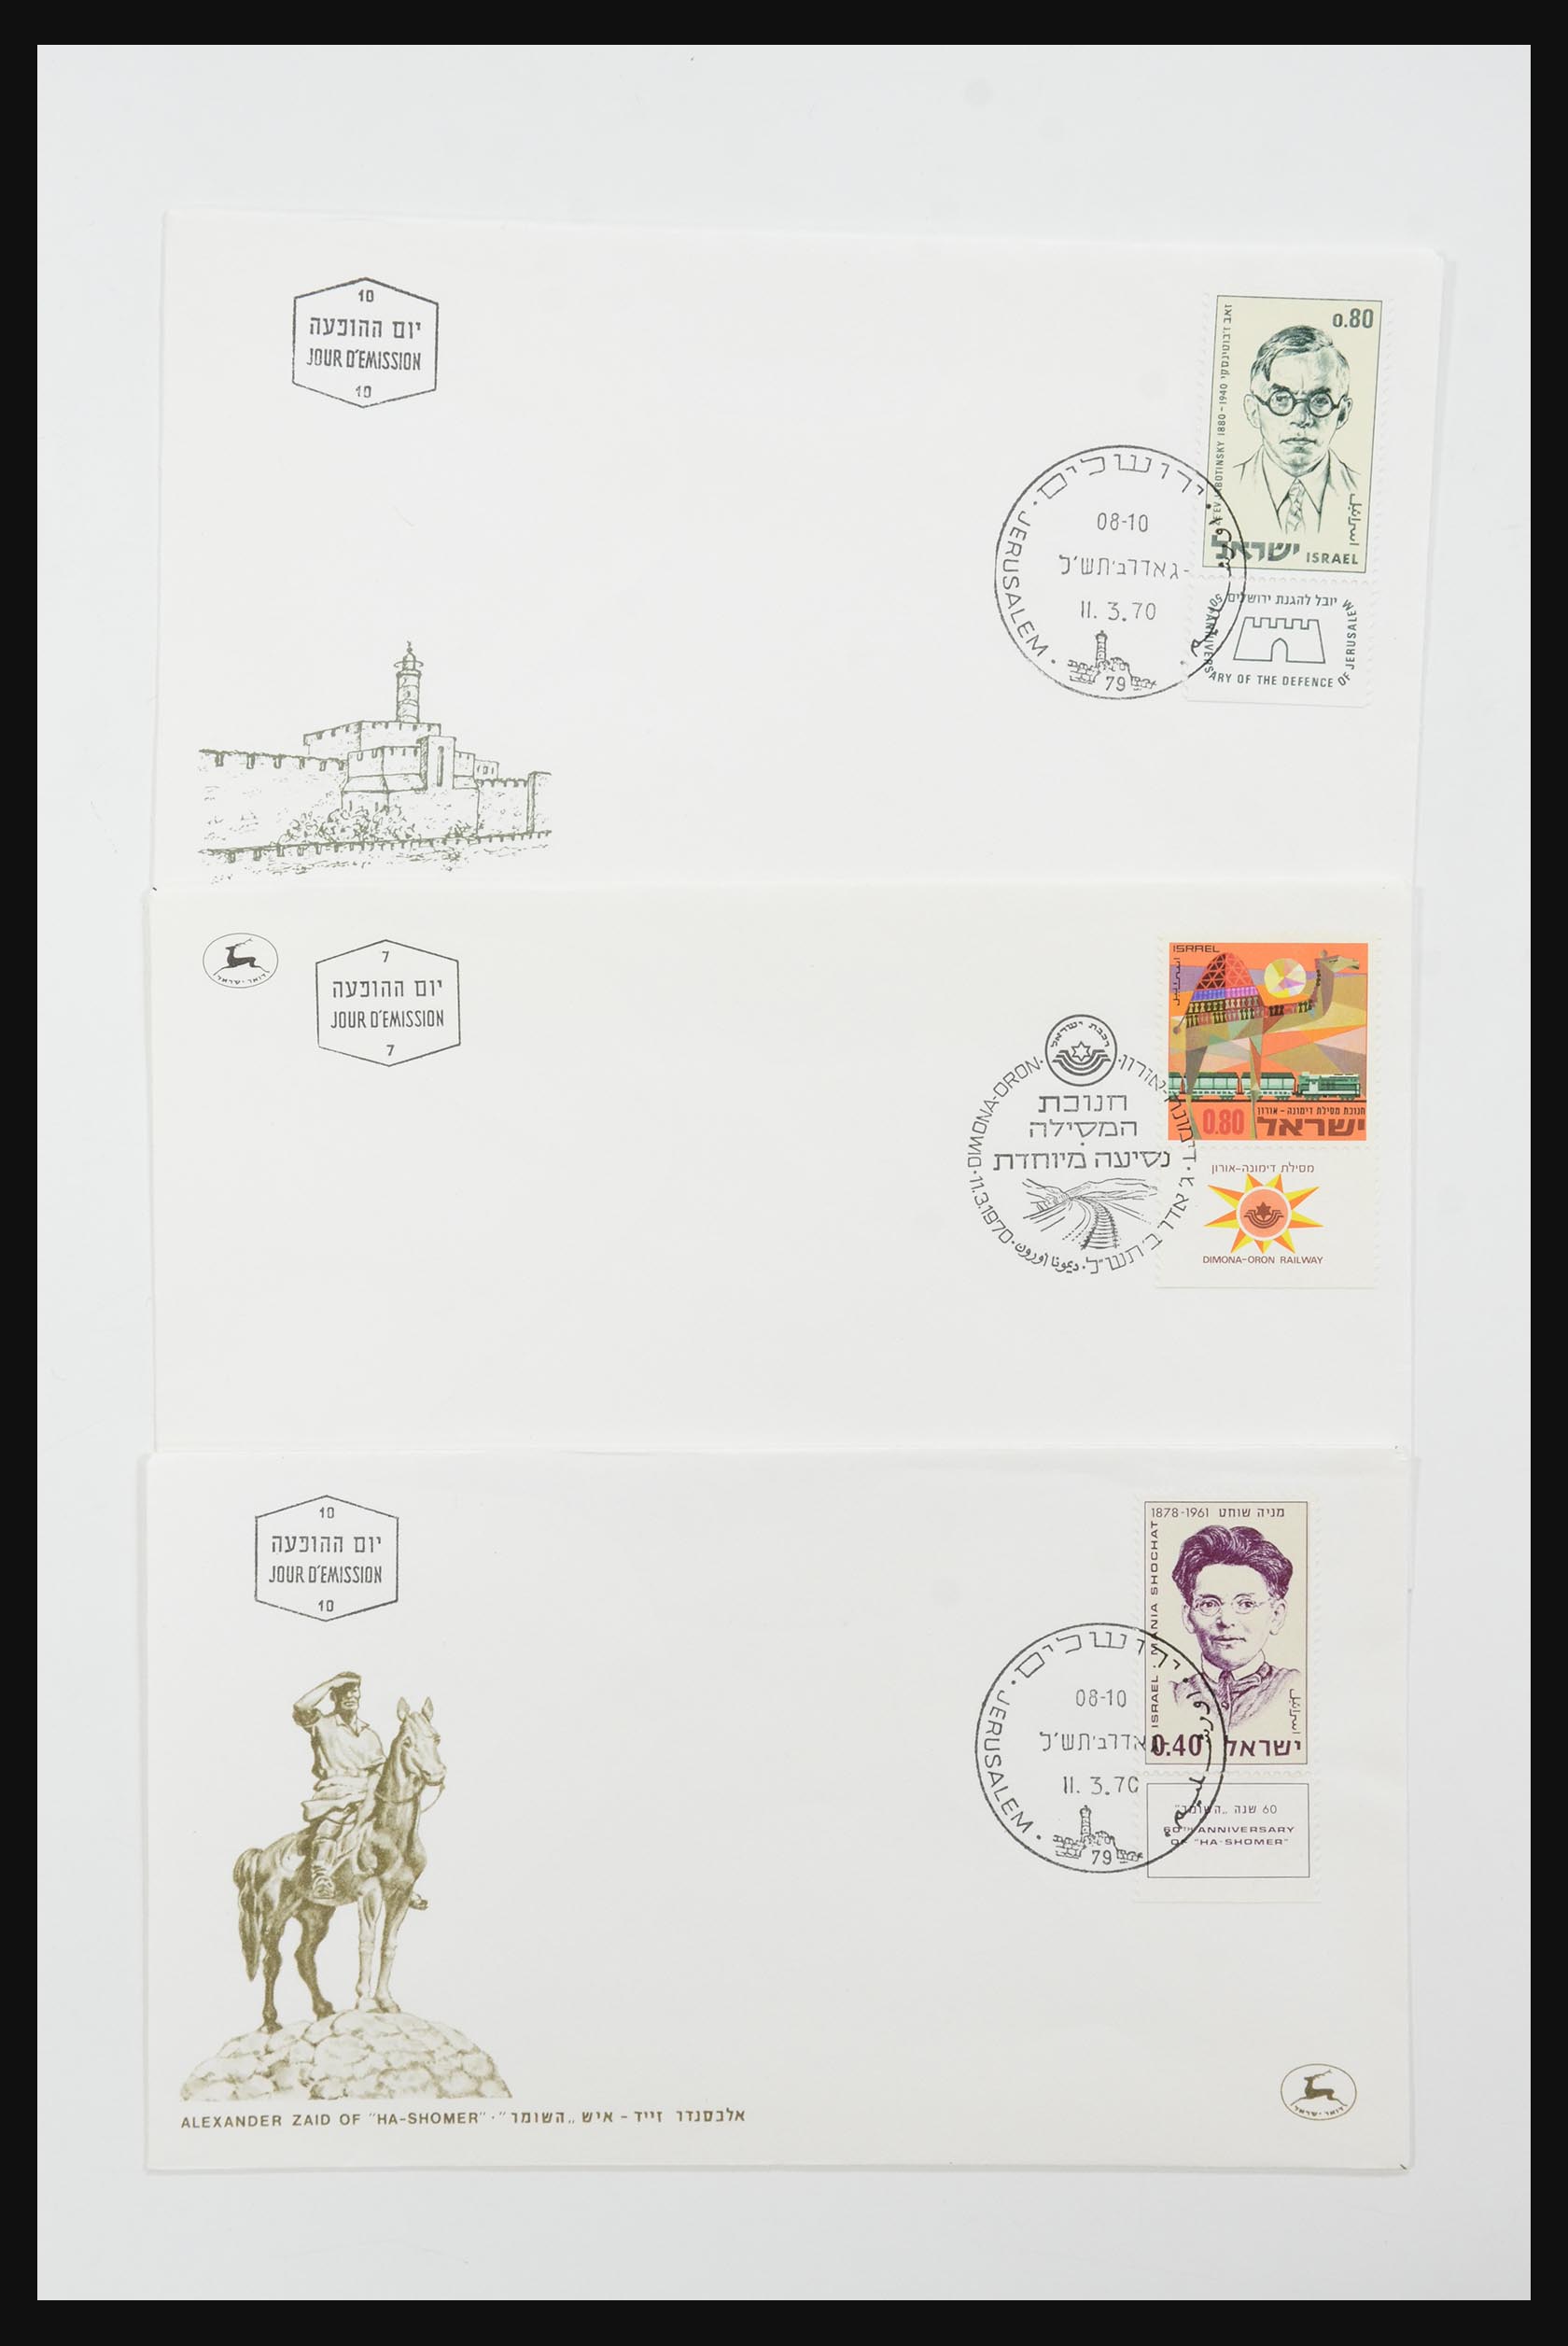 31924 582 - 31924 Israel first day cover collection 1957-2003.